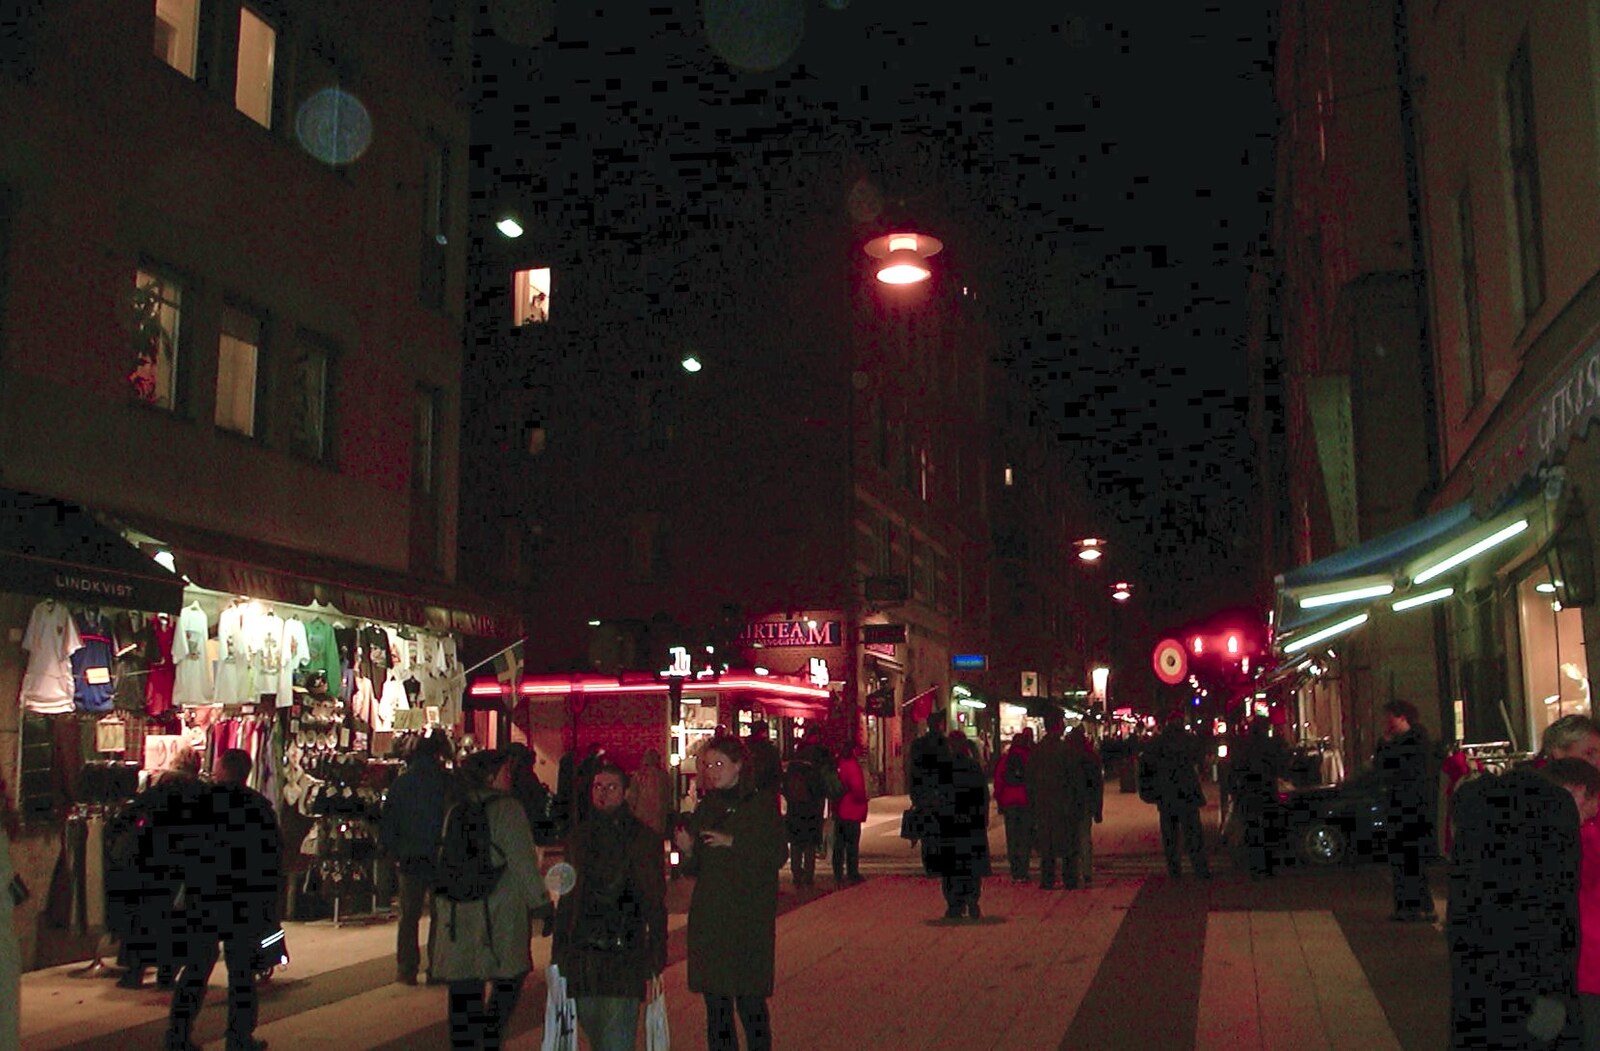 Stockholm high street at night from A 3G Lab Press Tour of Helsinki and Stockholm, Finland and Sweden - 12th March 2001